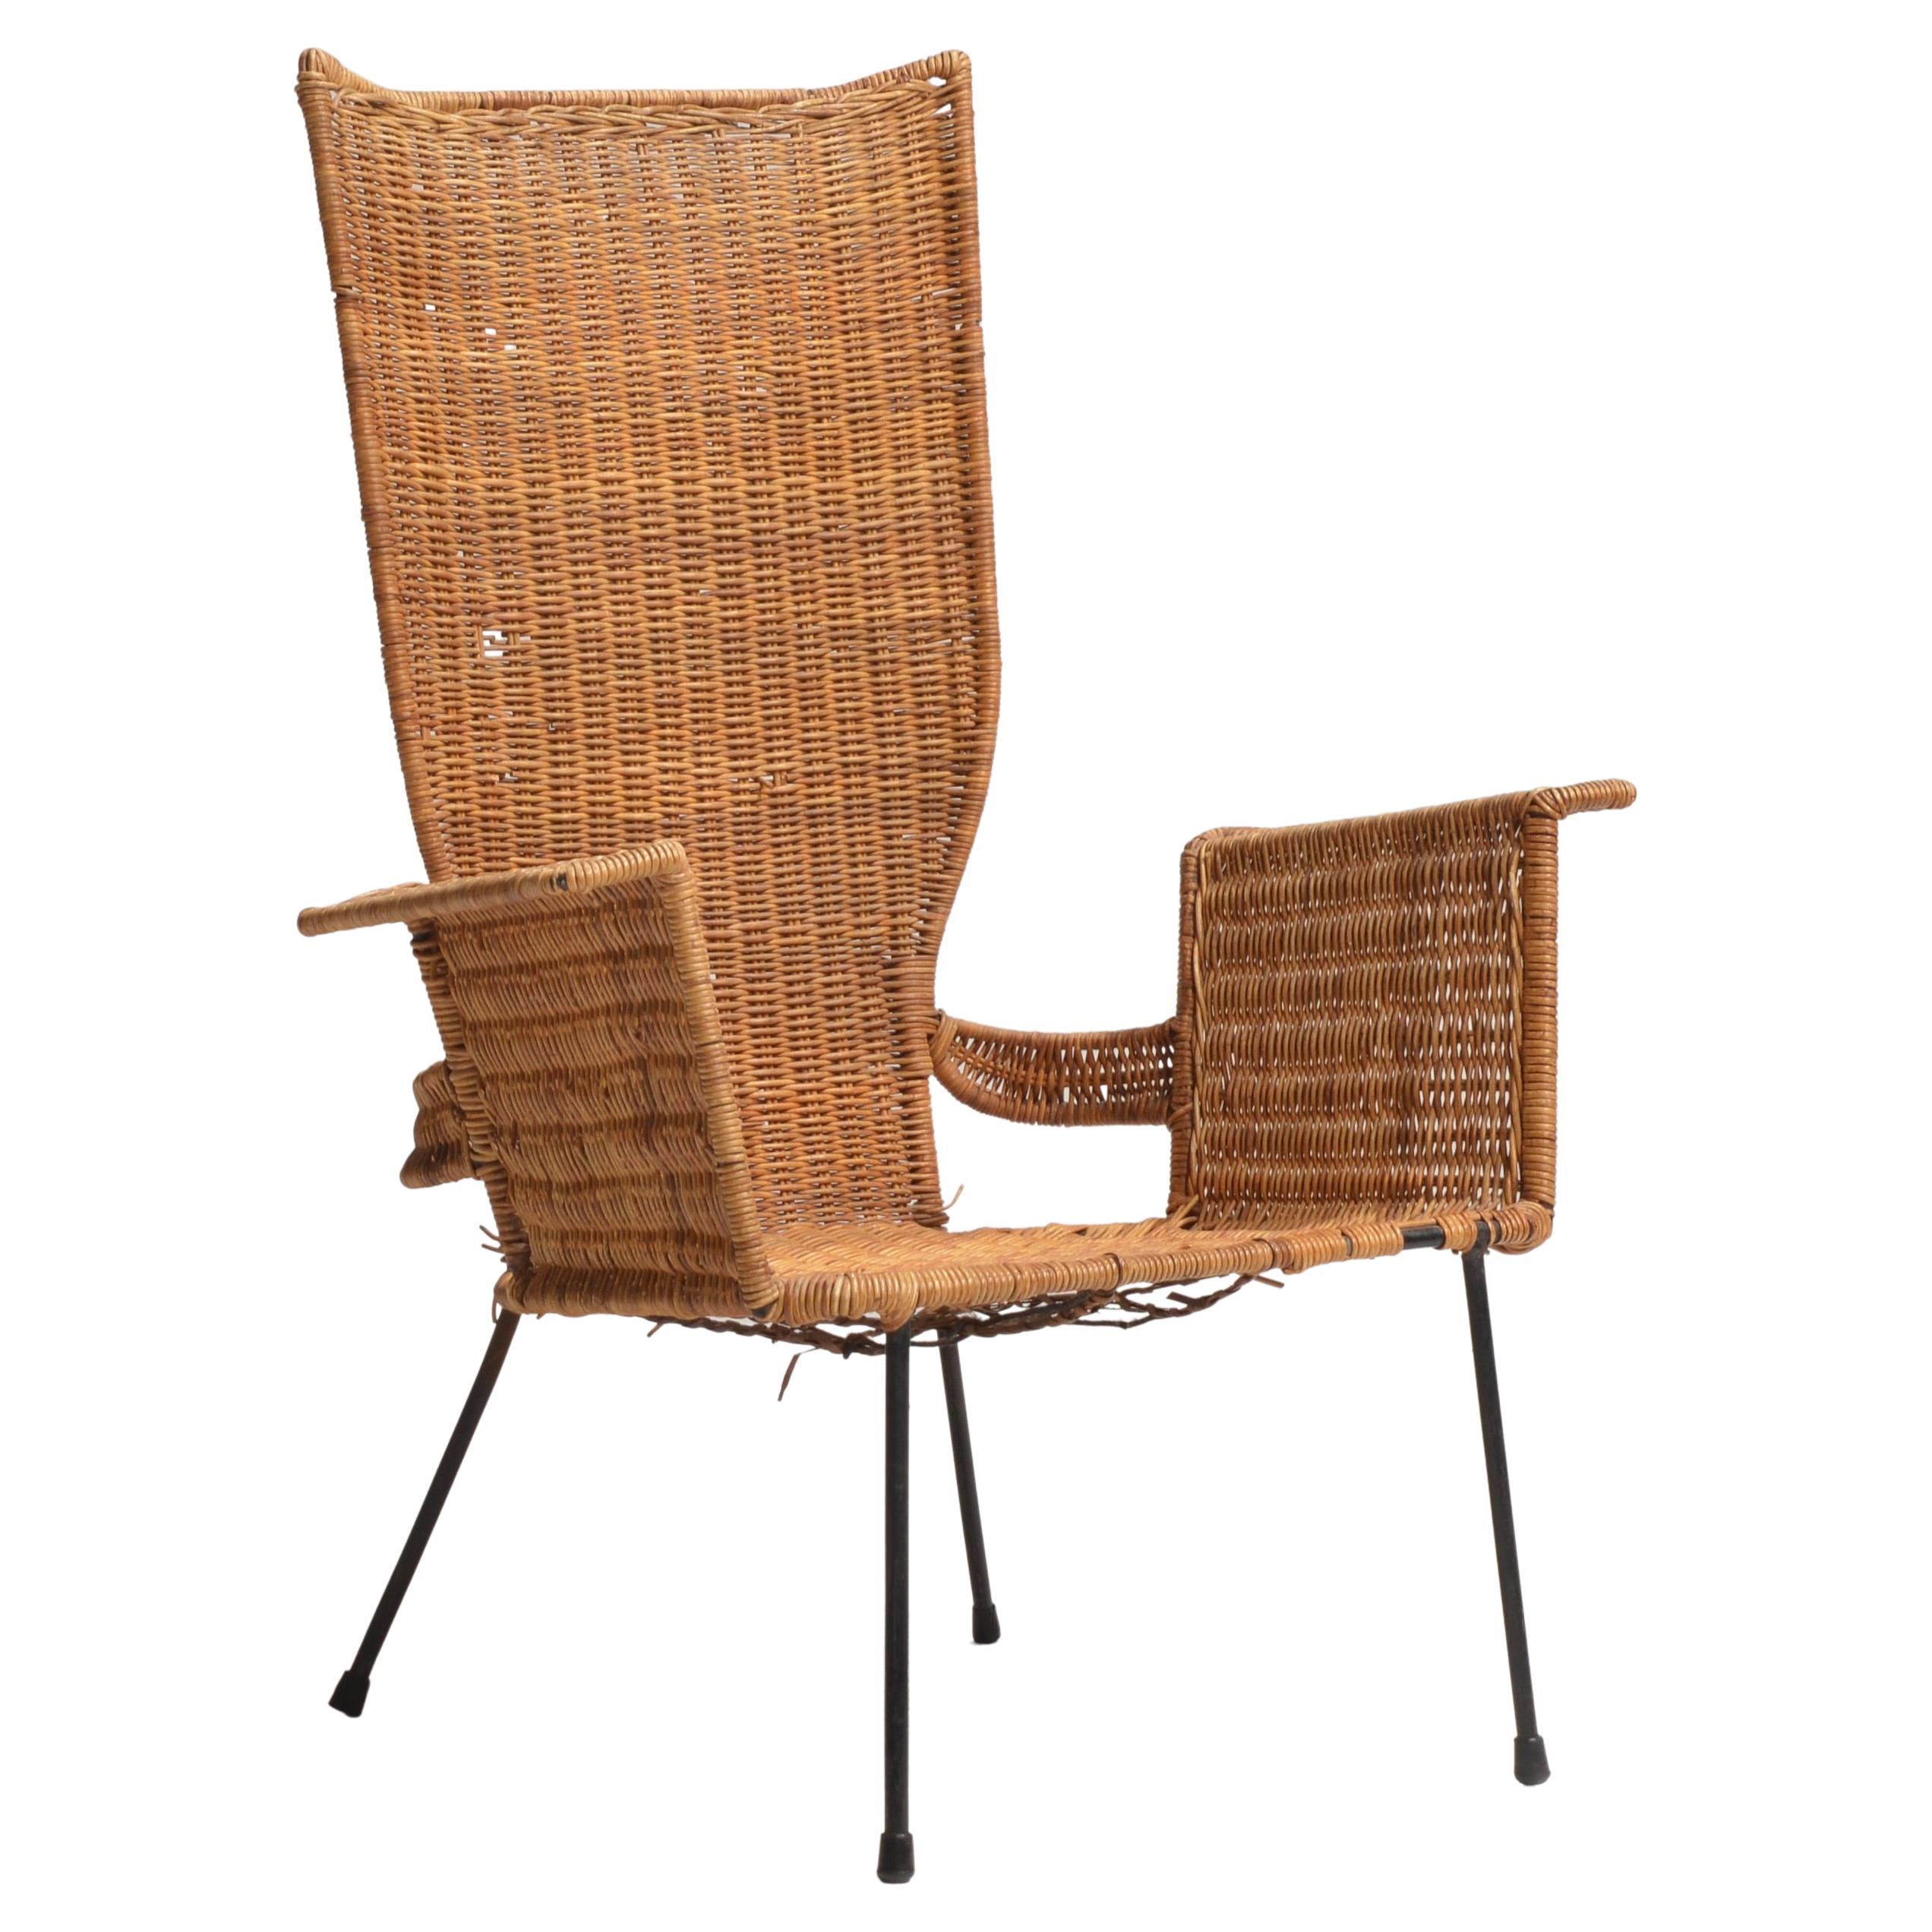 Very rare armchair in steel in rattan from Arthur Umanoff. 

Arthur Umanoff (1923–1985) is an American industrial designer who has designed furniture, lighting as well as interior items. Umanoff graduated from the New York’s Pratt Institute and